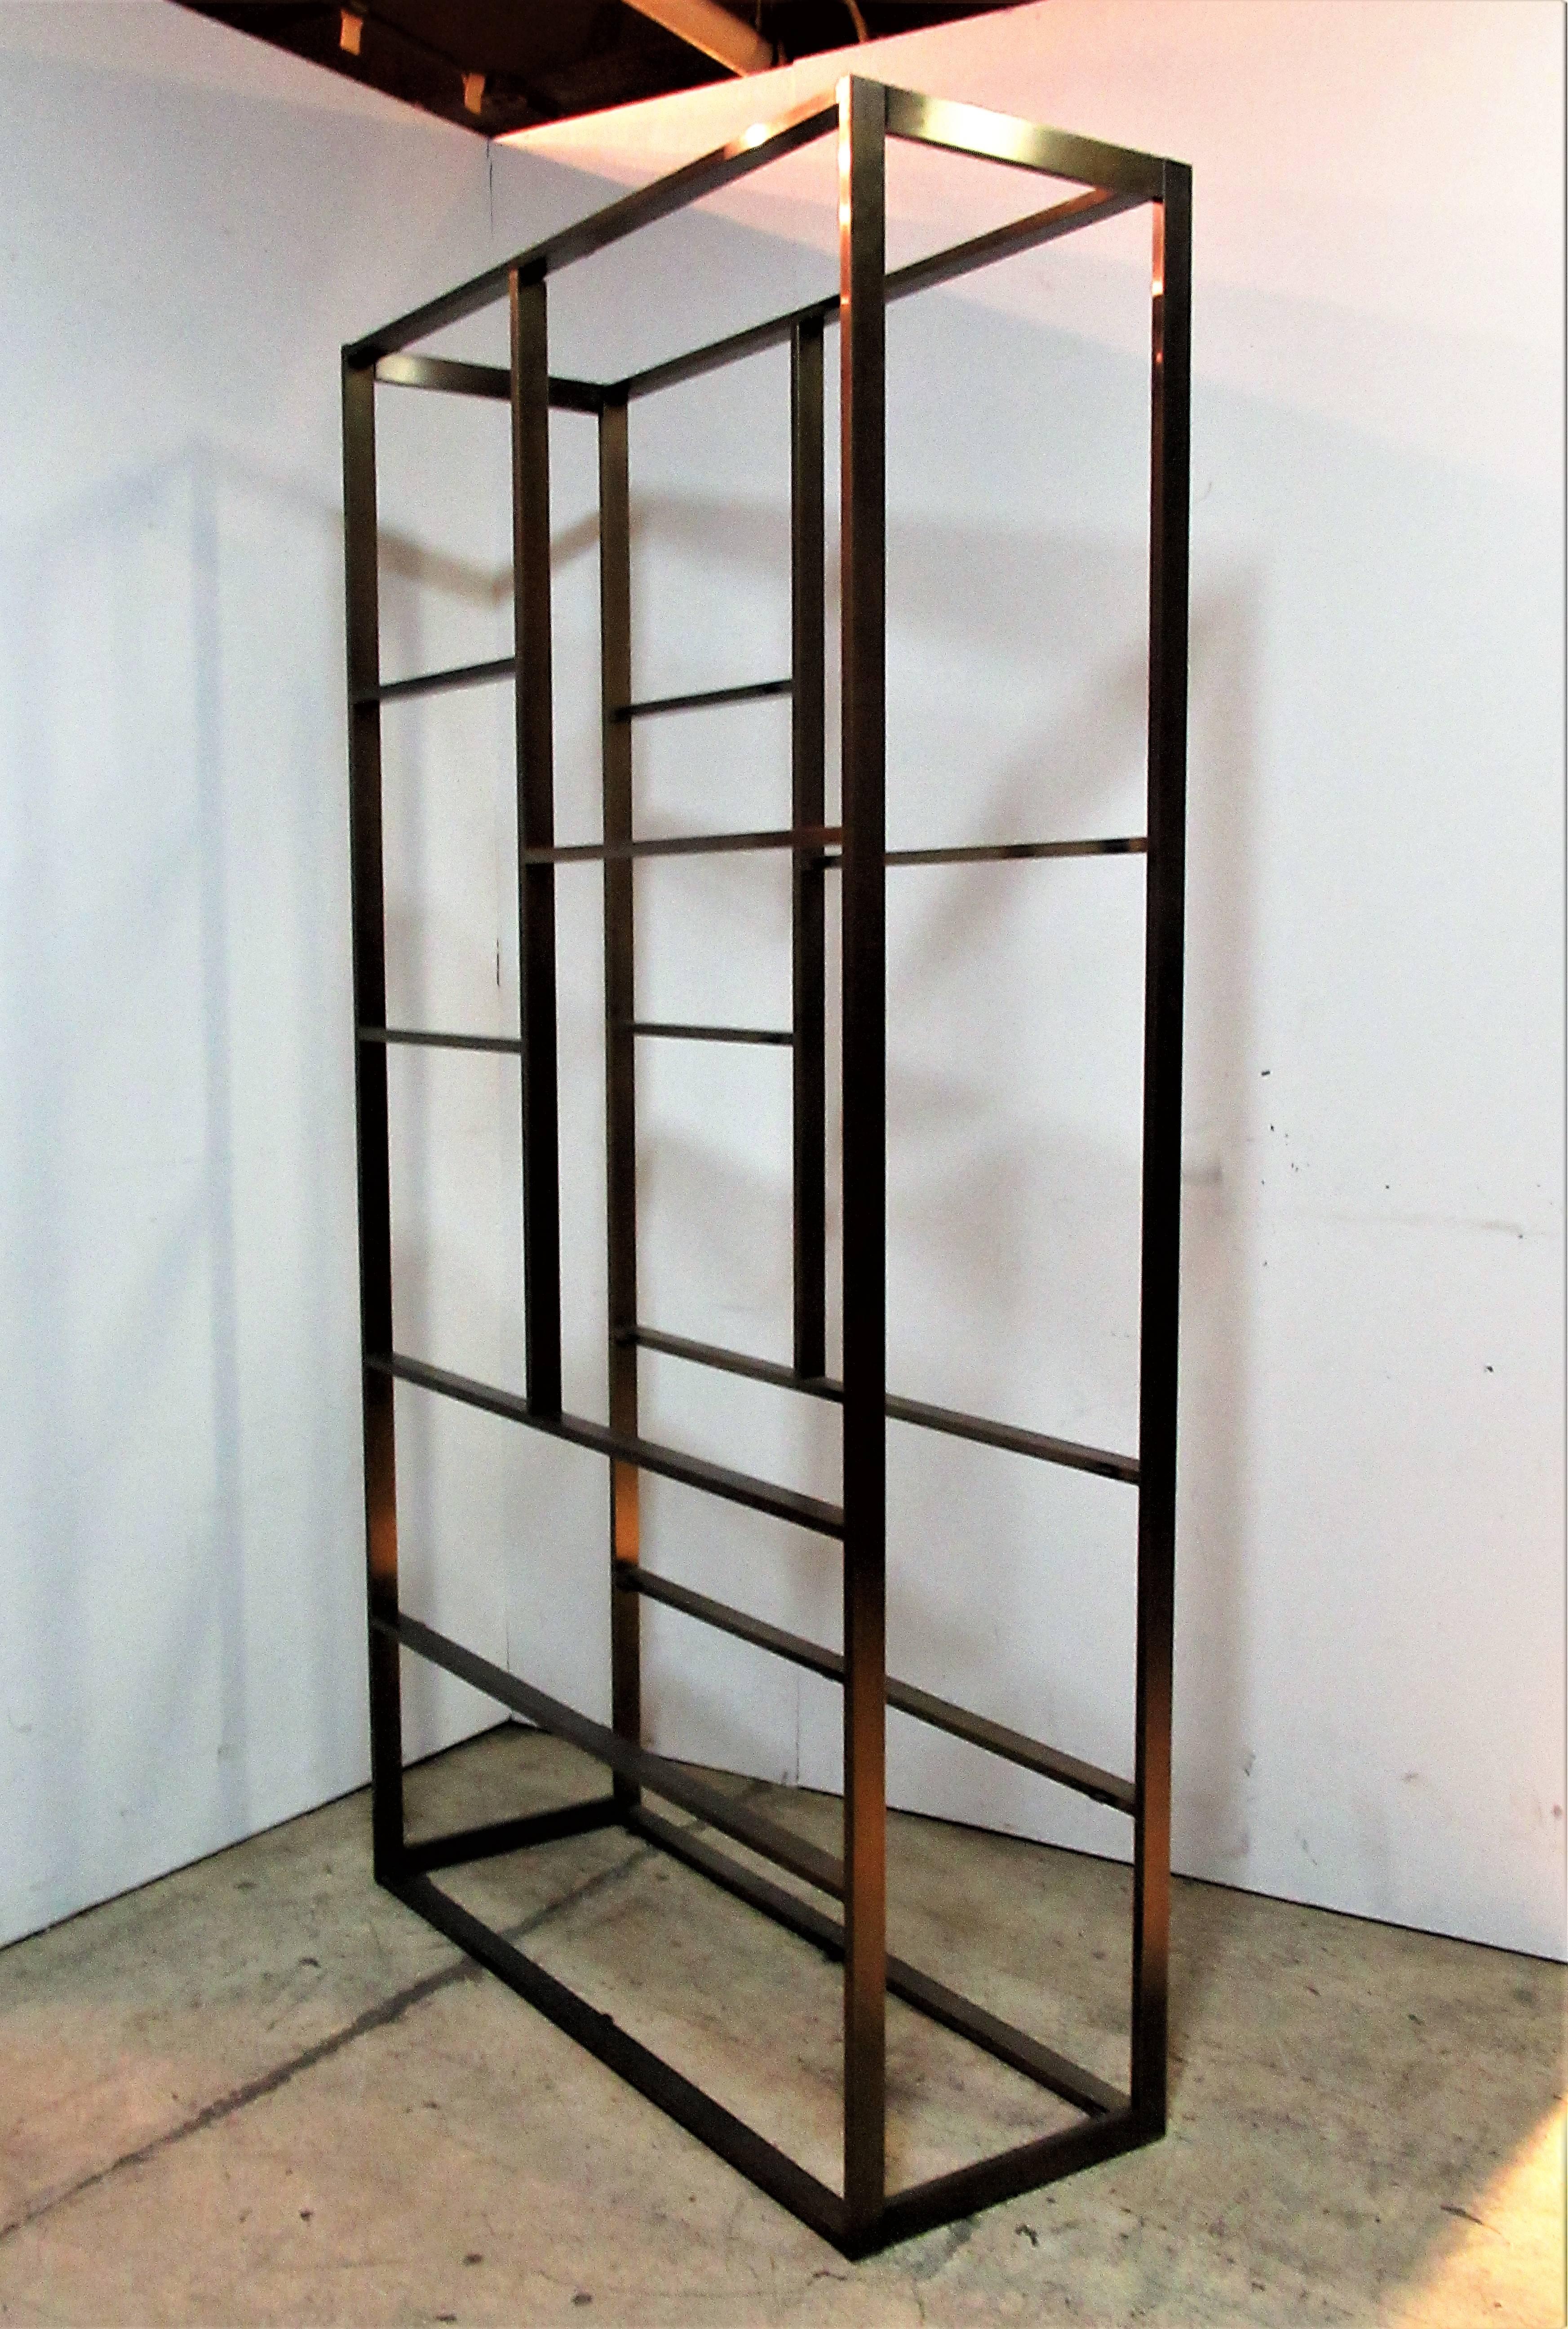 Exceptionally fine quality heavyweight bronzed steel etagere with seven glass shelves - circa 1970 designed by Milo Baughman. Structurally perfect solid strong. Great condition. Beautiful